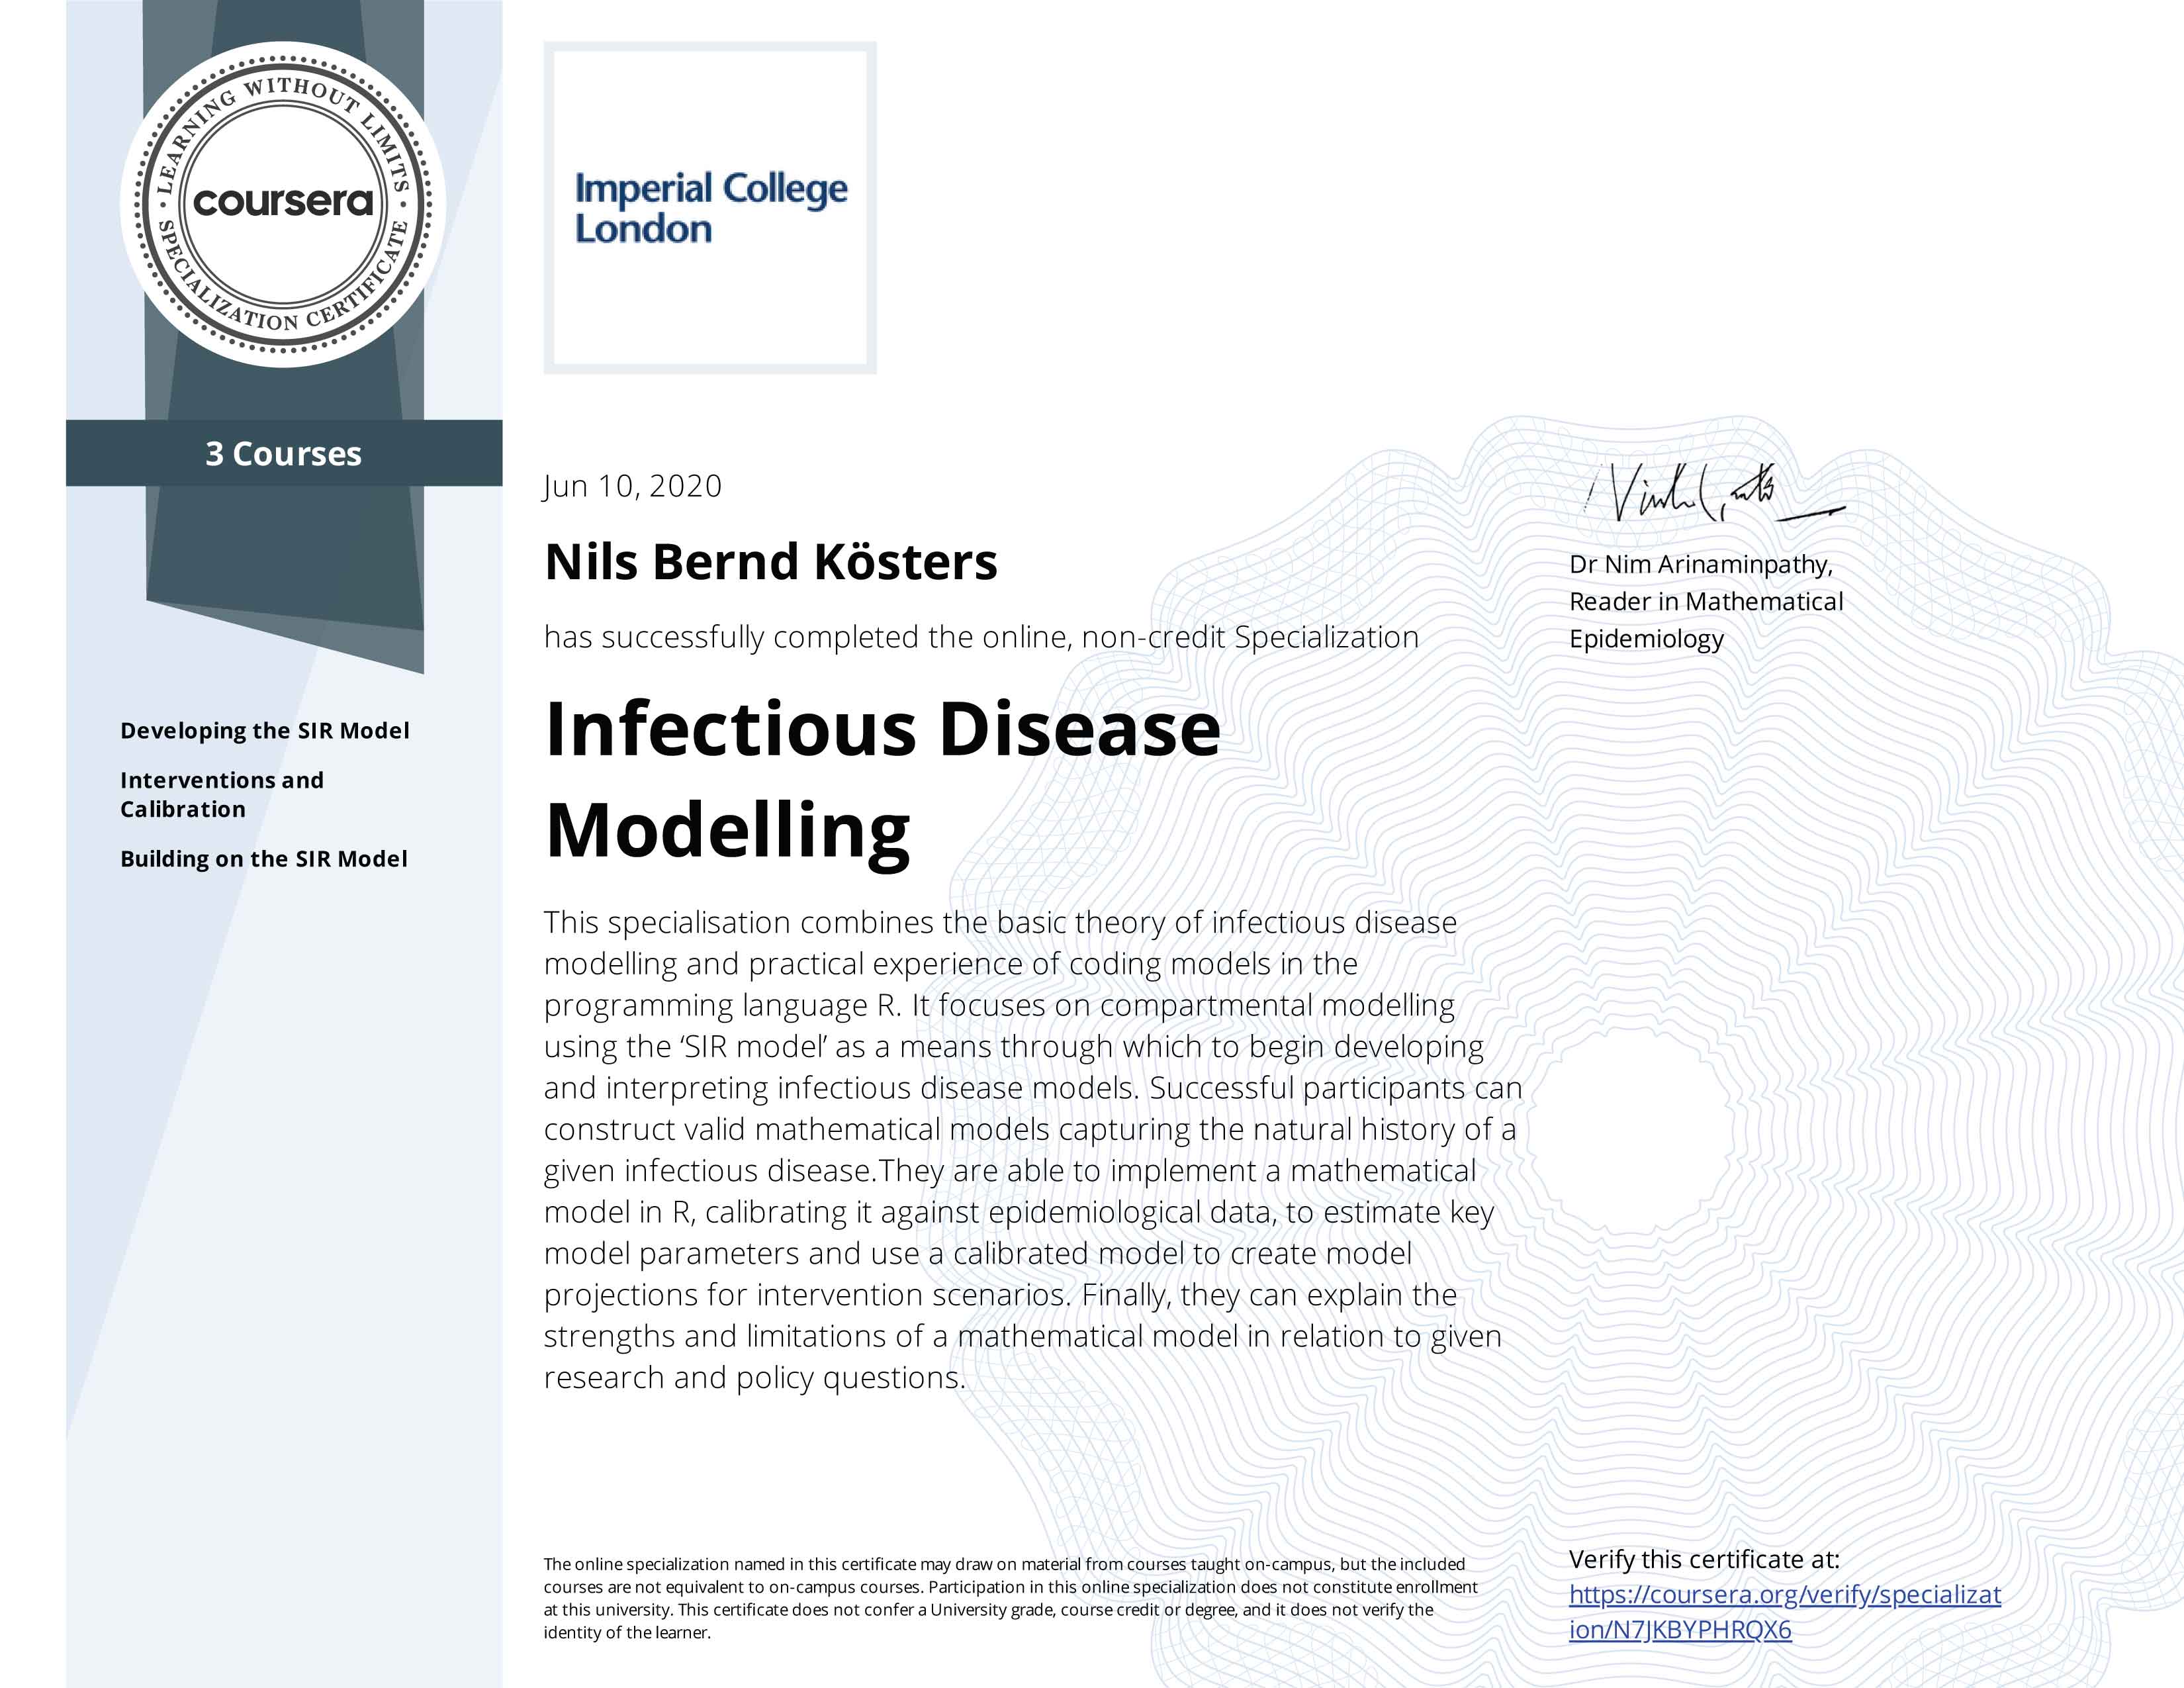 Infectious Disease Modelling Specialisations